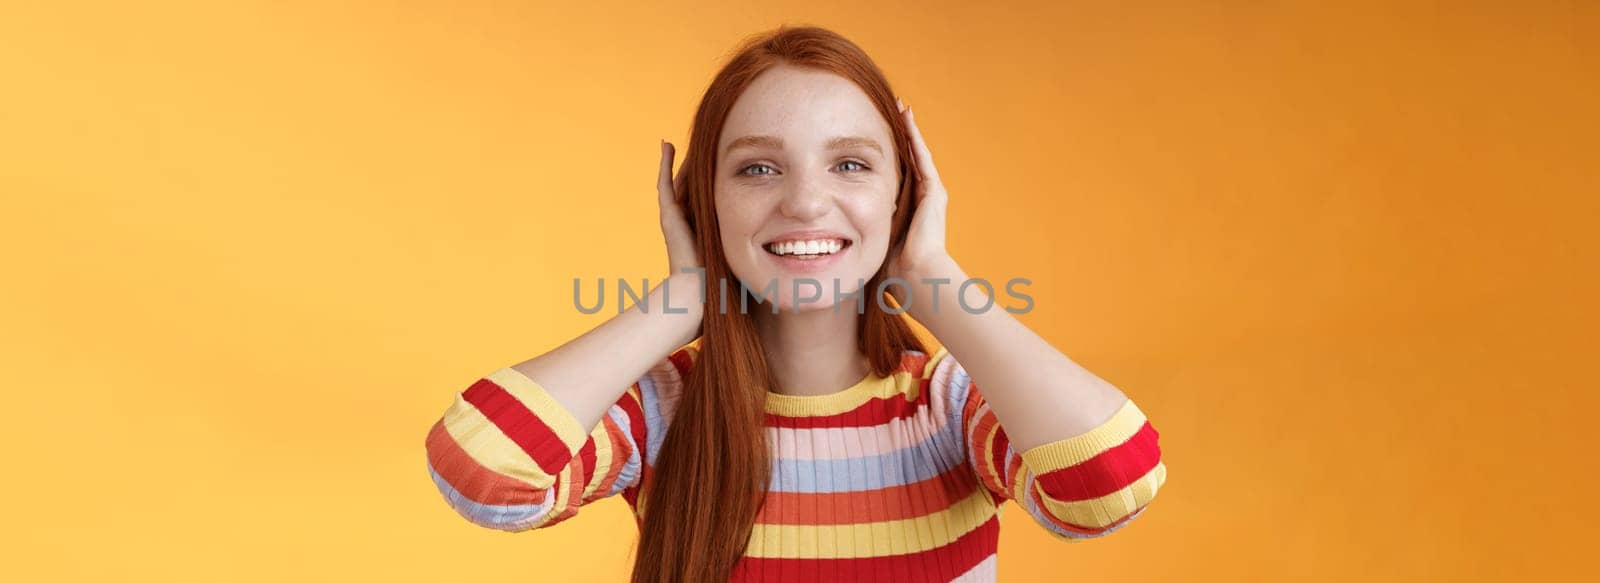 Lifestyle. Cute playful tender smiling ginger girl blue eyes silly cover ears palms grinning fool around not hear anyone carefree unwilling listen noisy people standing careless relaxed orange background.